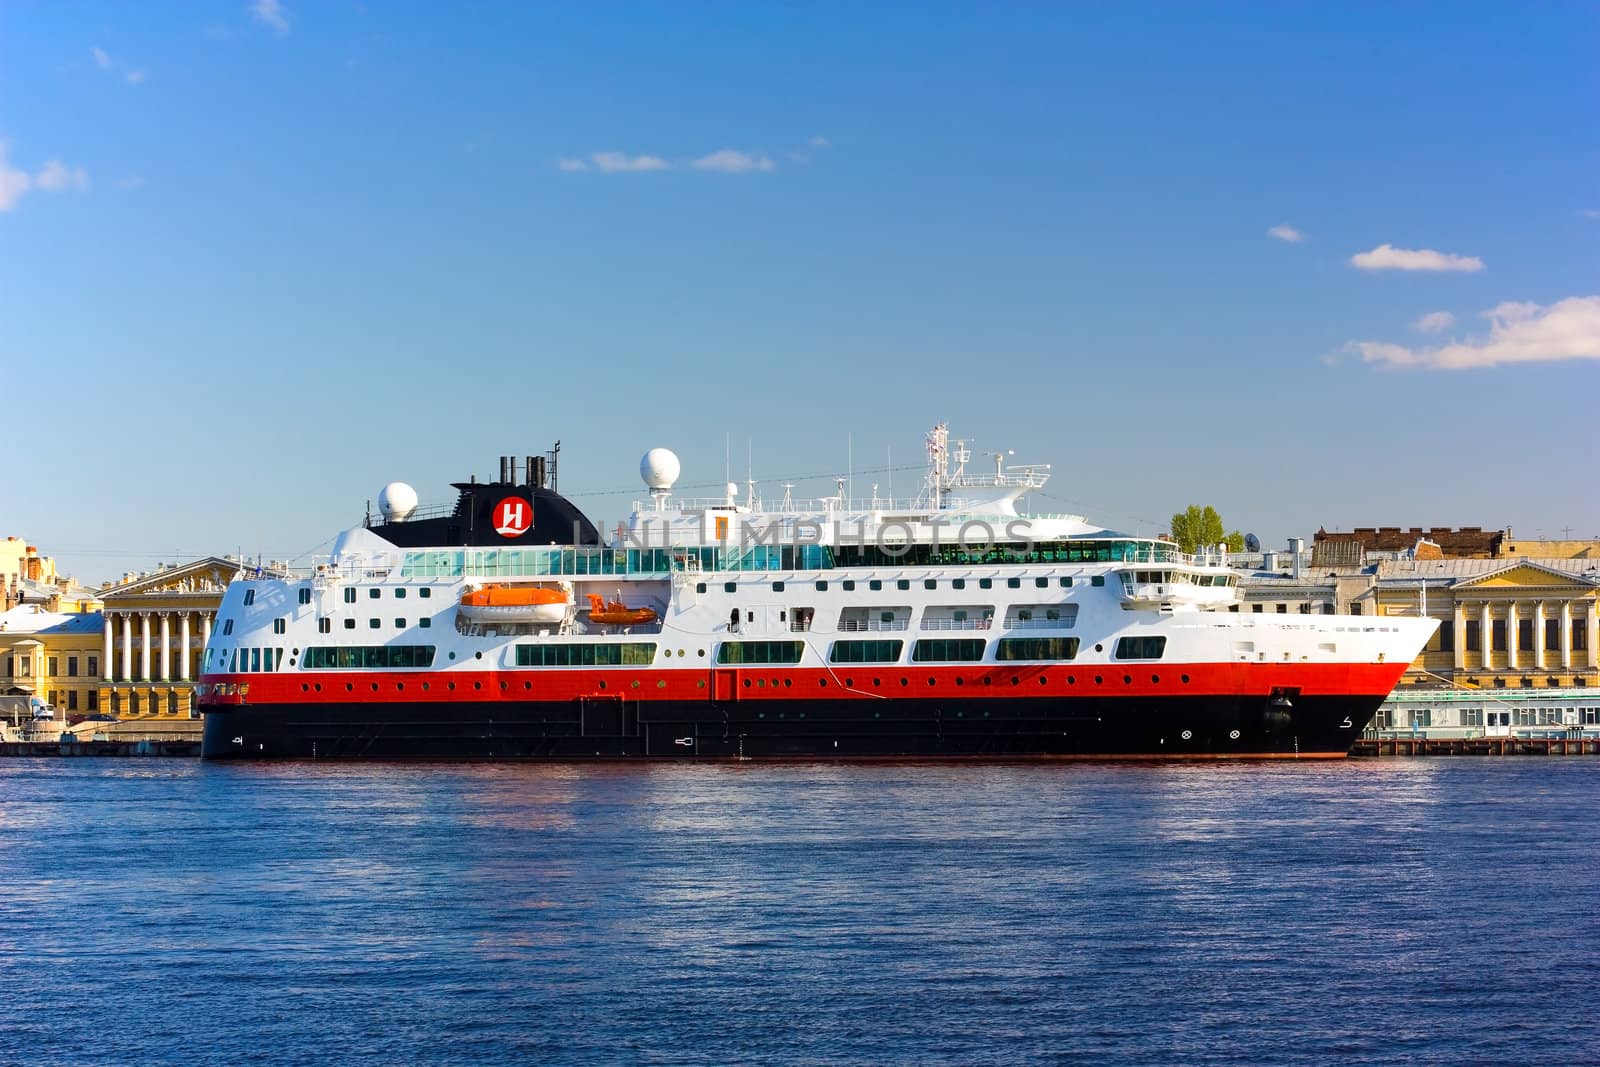 Sea liner in city embankment by snaka